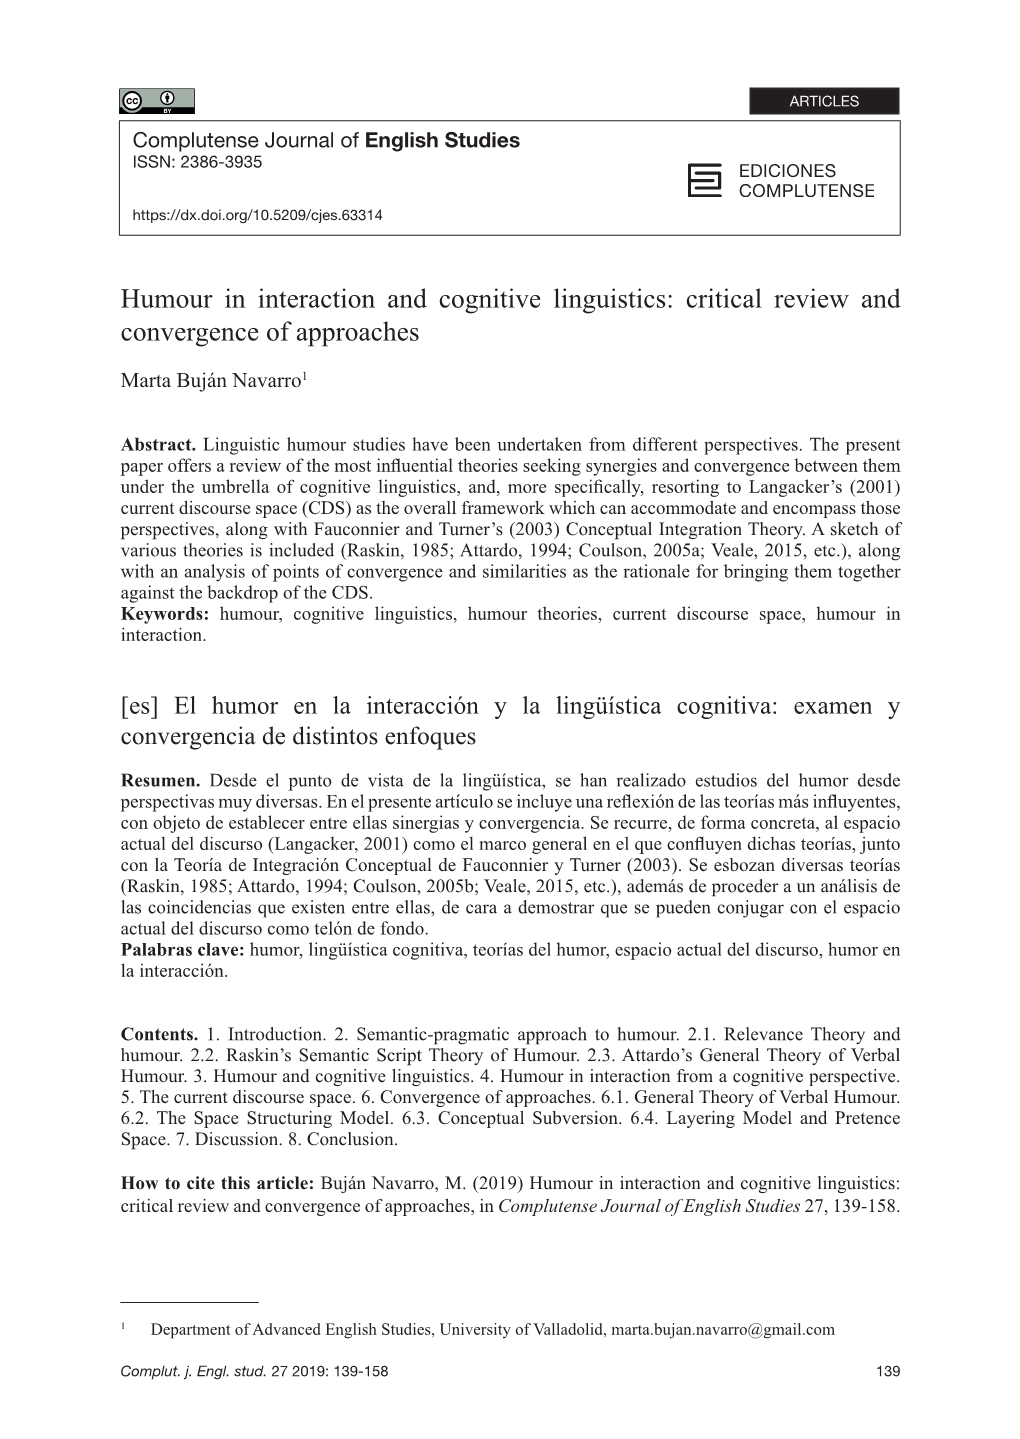 Humour in Interaction and Cognitive Linguistics: Critical Review and Convergence of Approaches